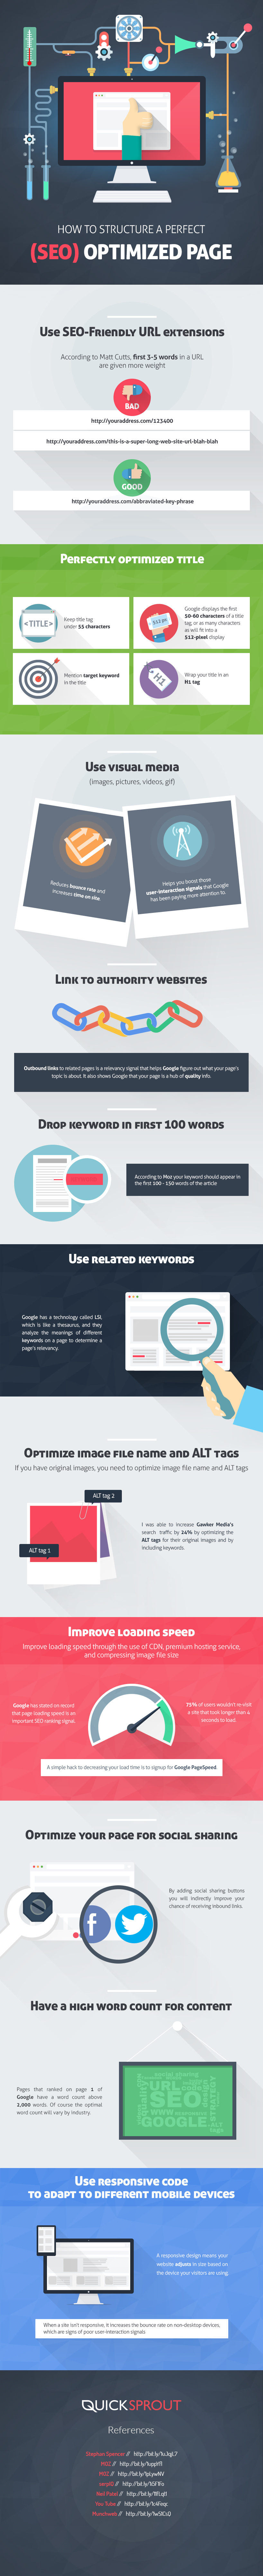 The-Perfect-On-Page-SEO-Checklist-for-2016-Infographic-image